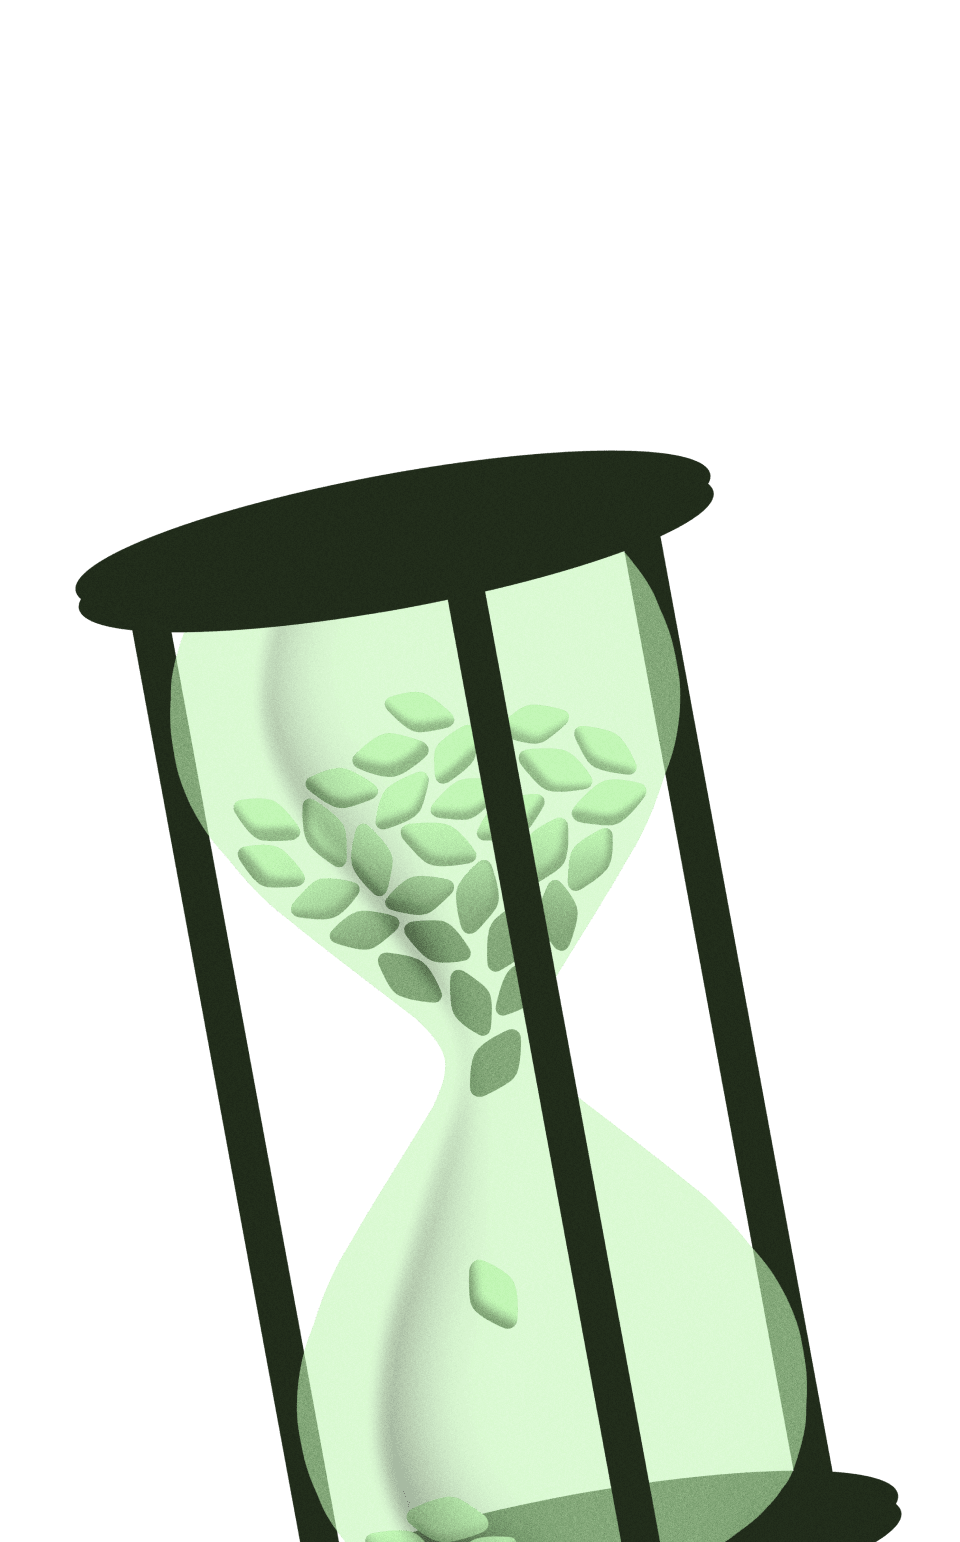 Illustration of a green hourglass containing pills shaped similar to Viagra rather than sand.